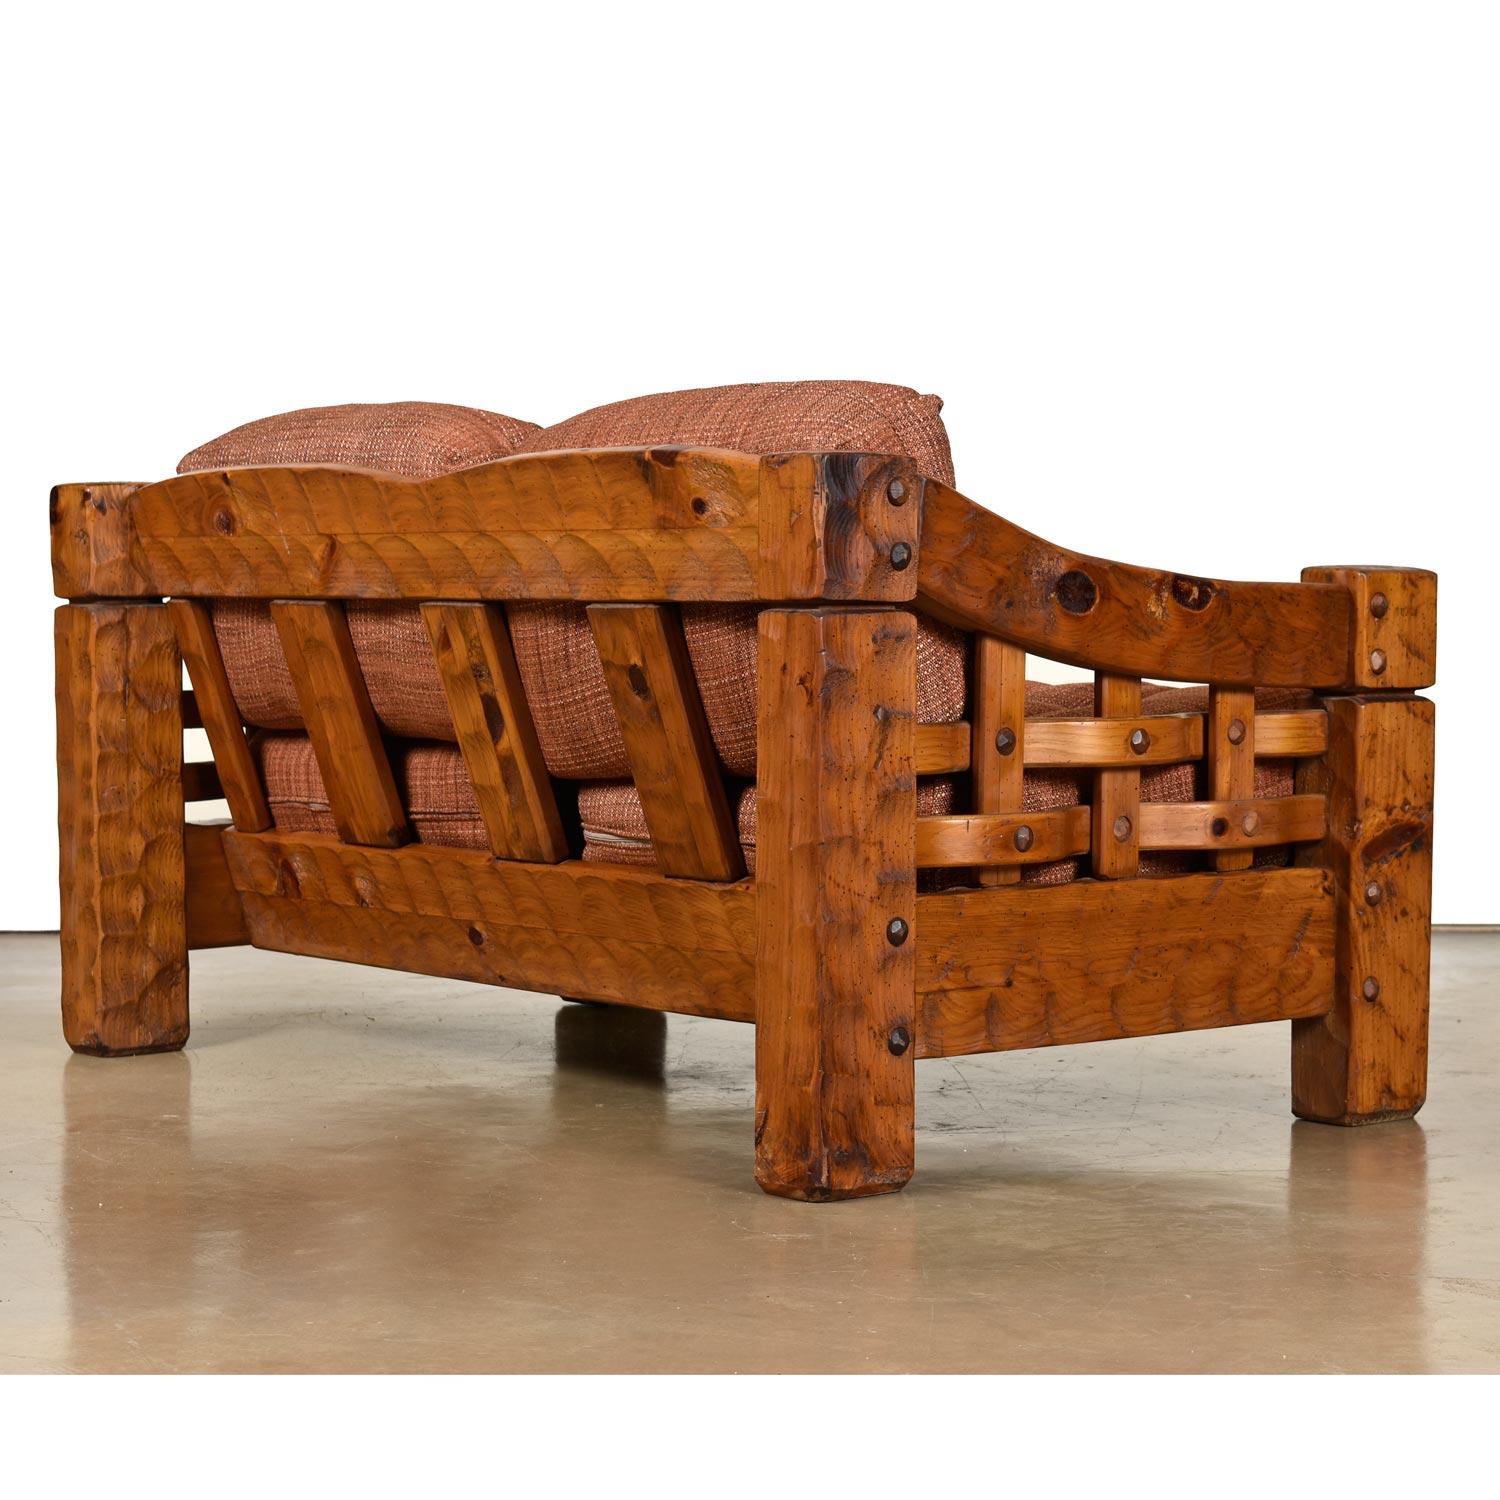 Asking someone how much they earn is tacky. This set isn't tacky, it's just on another level. 

Rustic modern is the best way we can describe this truly unique loveseat sofa. You don't need a ski lodge or Hemingwayesque cabin to integrate this